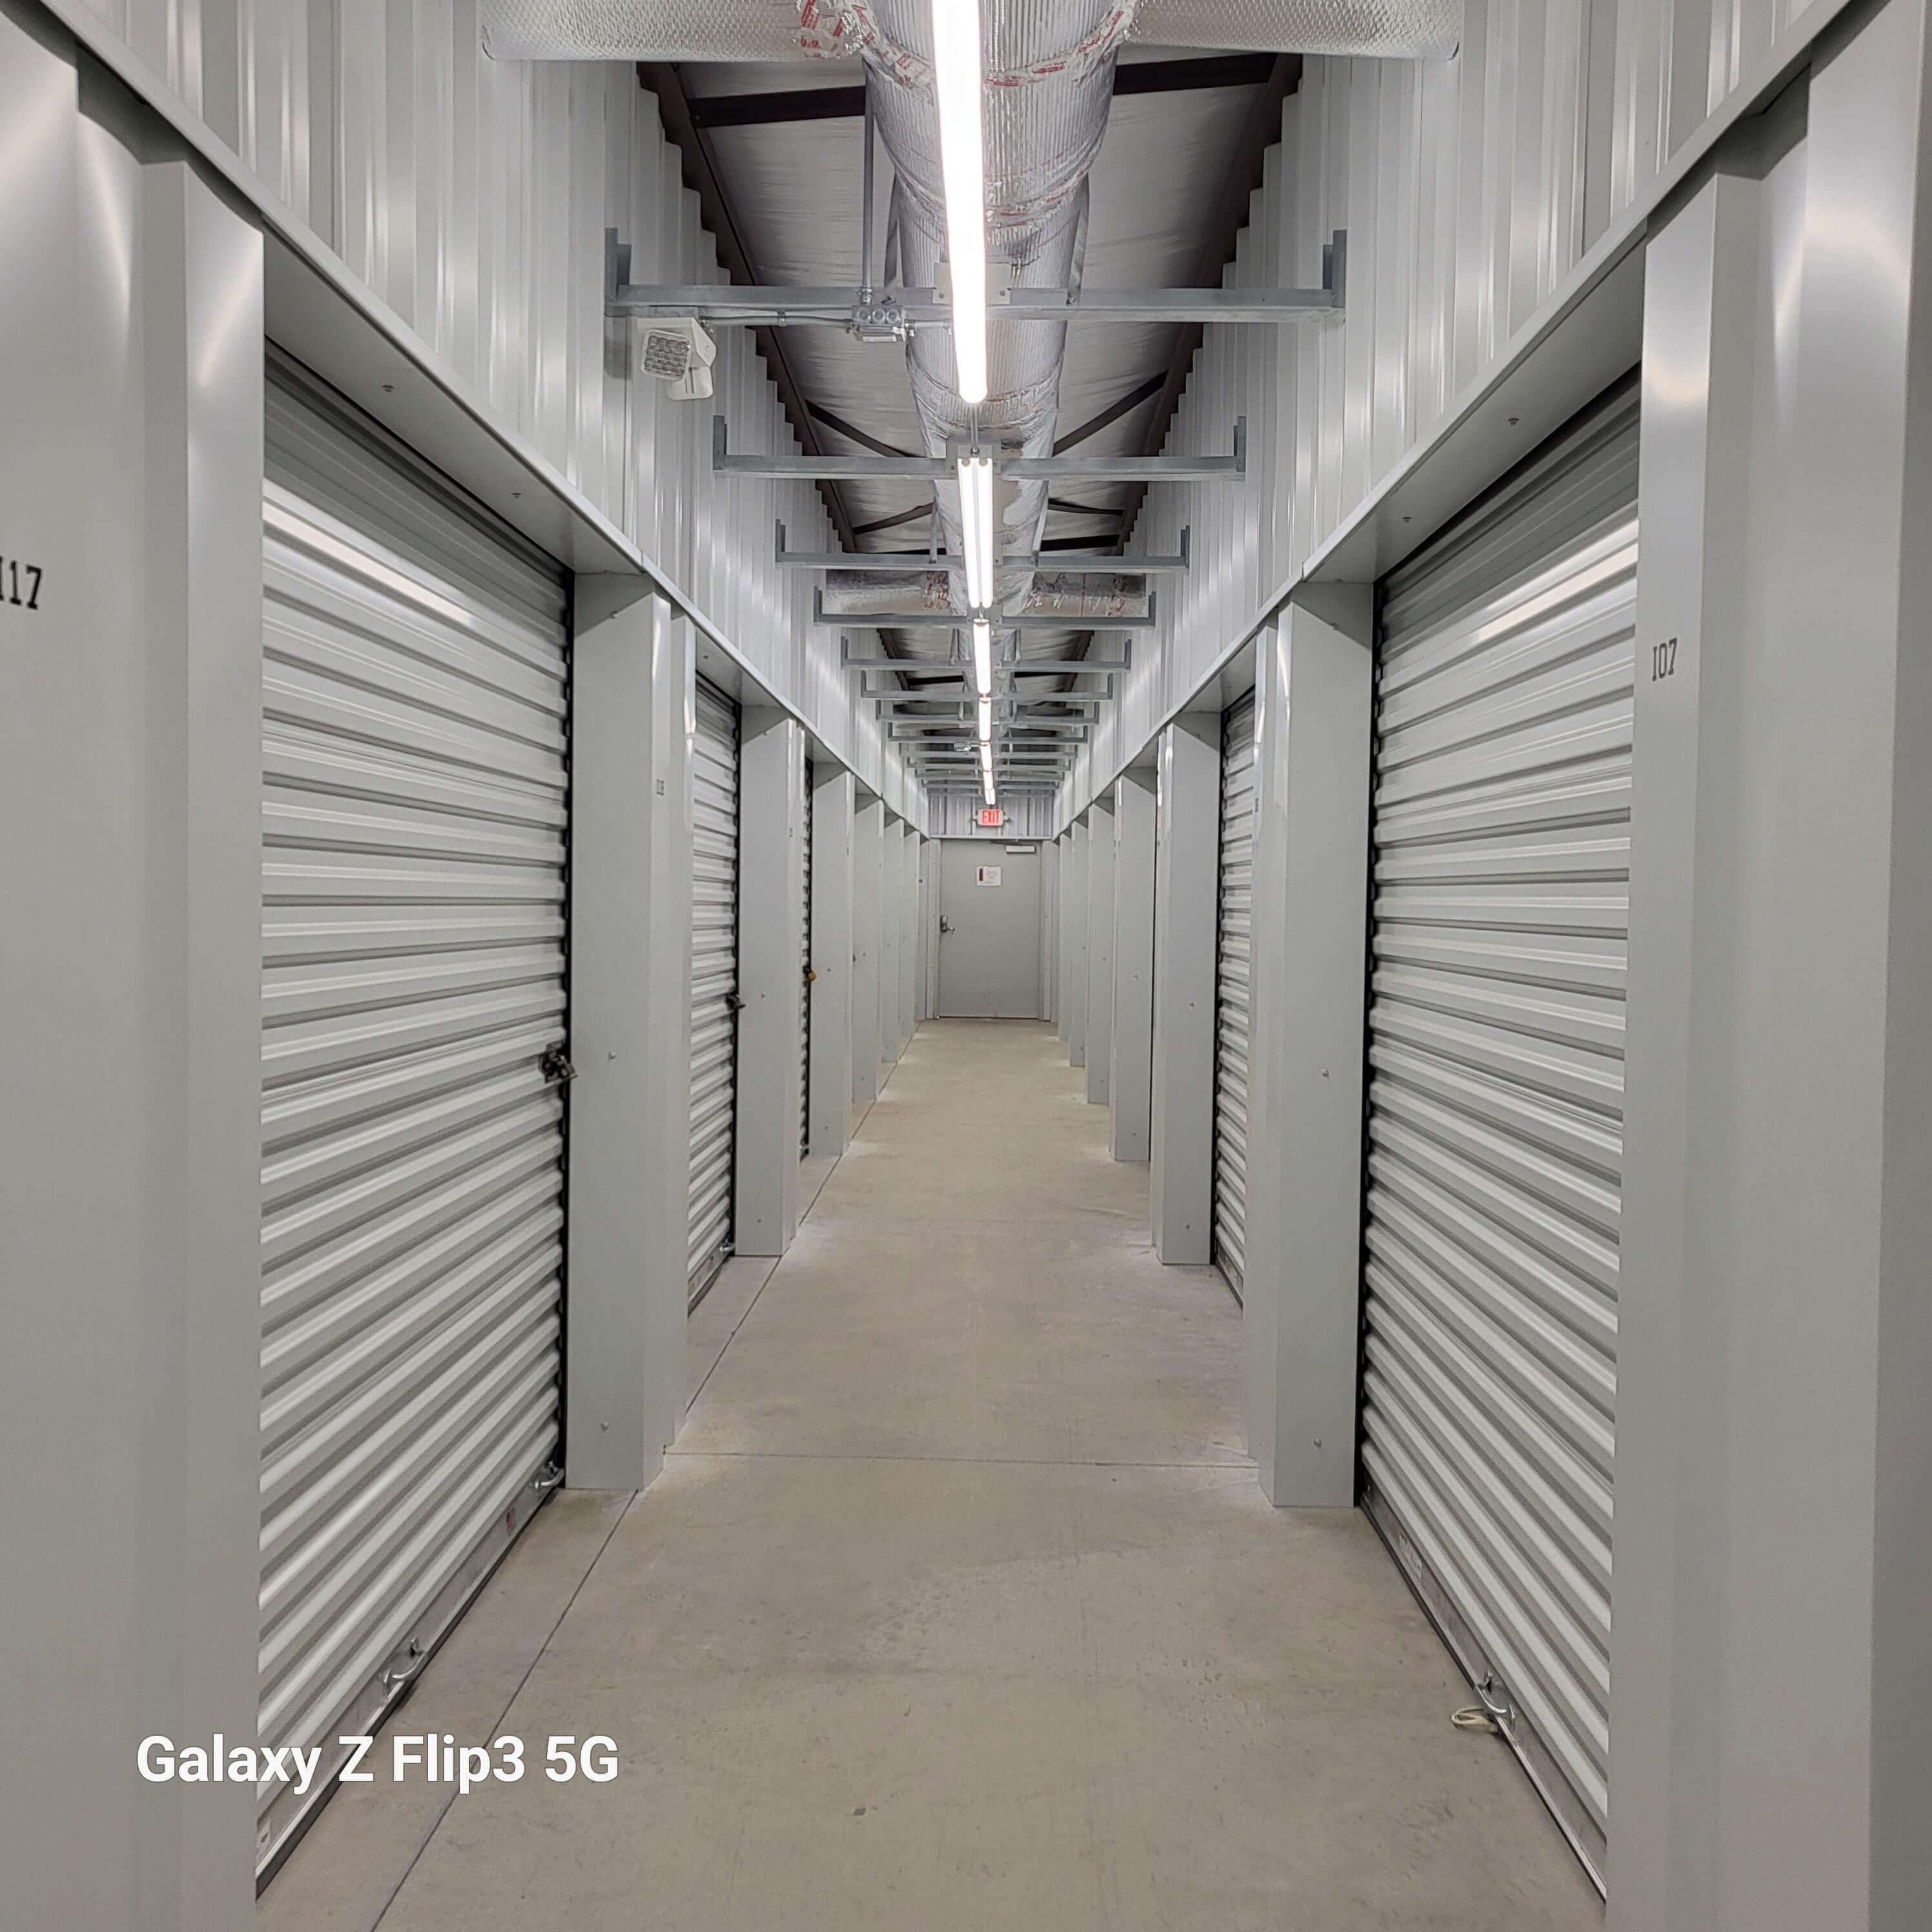 A well-organized and secure self-storage facility featuring rows of storage units with various sizes and configurations. Each unit is equipped with sturdy locks and surveillance cameras for added security. The facility is clean and well-maintained, with wide aisles for easy access. The signage prominently displays the name of the self-storage company and its contact information. This image showcases the ideal self-storage solution for individuals and businesses looking for safe and convenient storage options